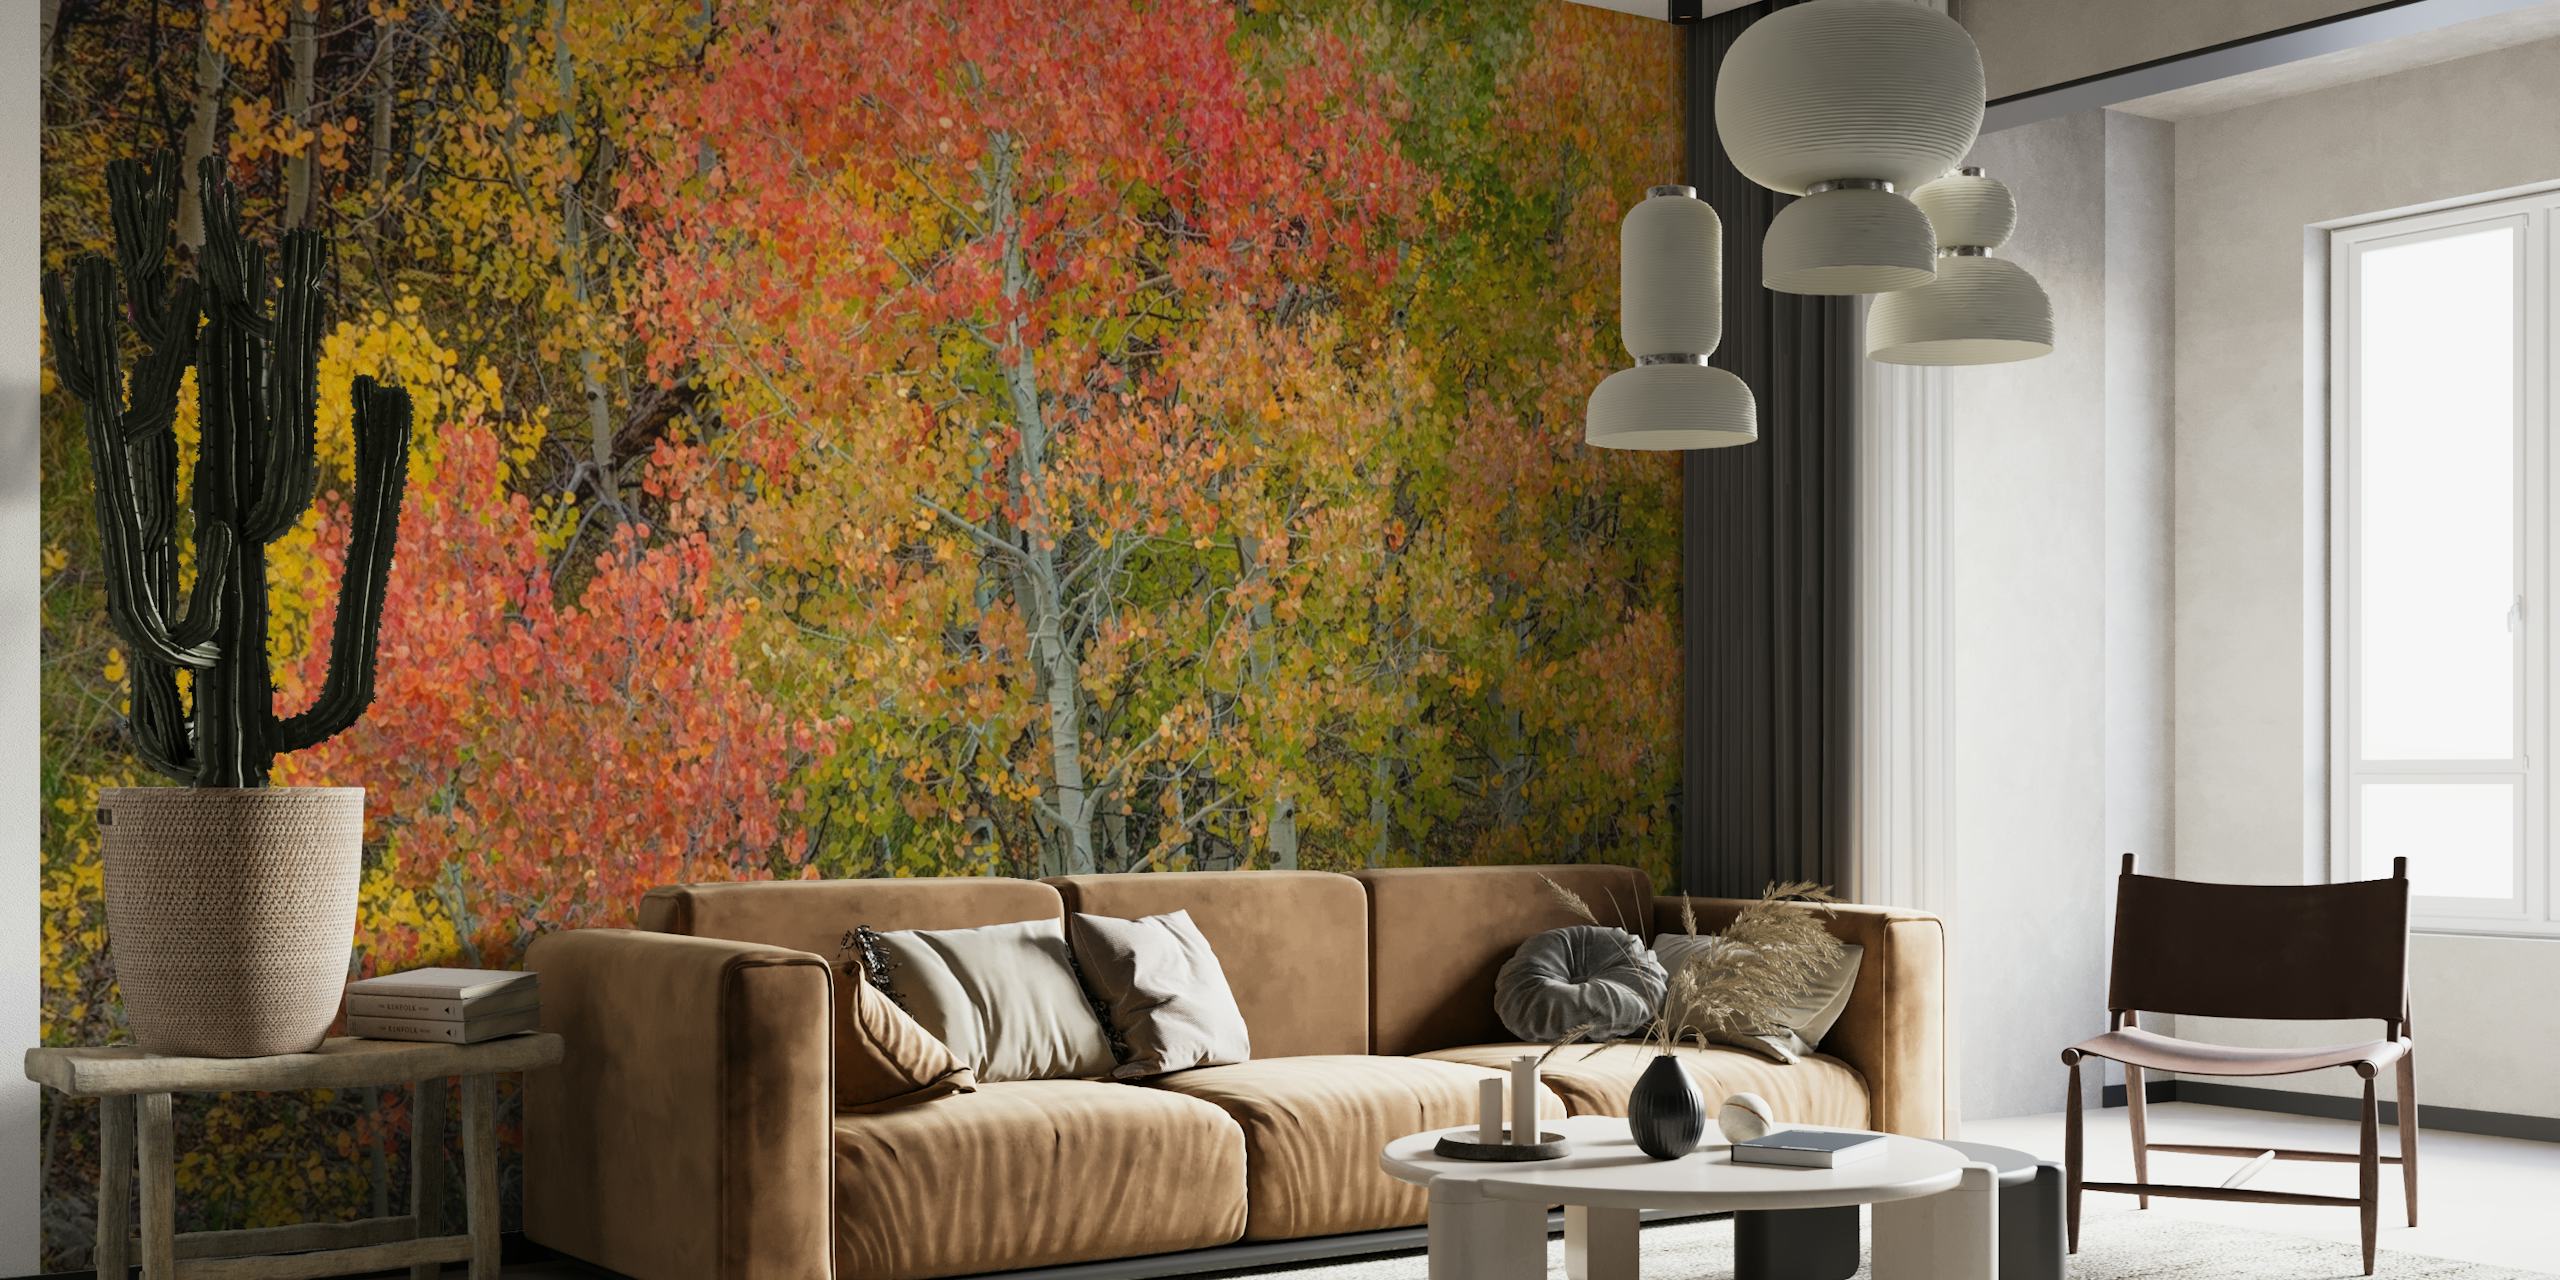 Autumn foliage wall mural with red, orange, and yellow leaves